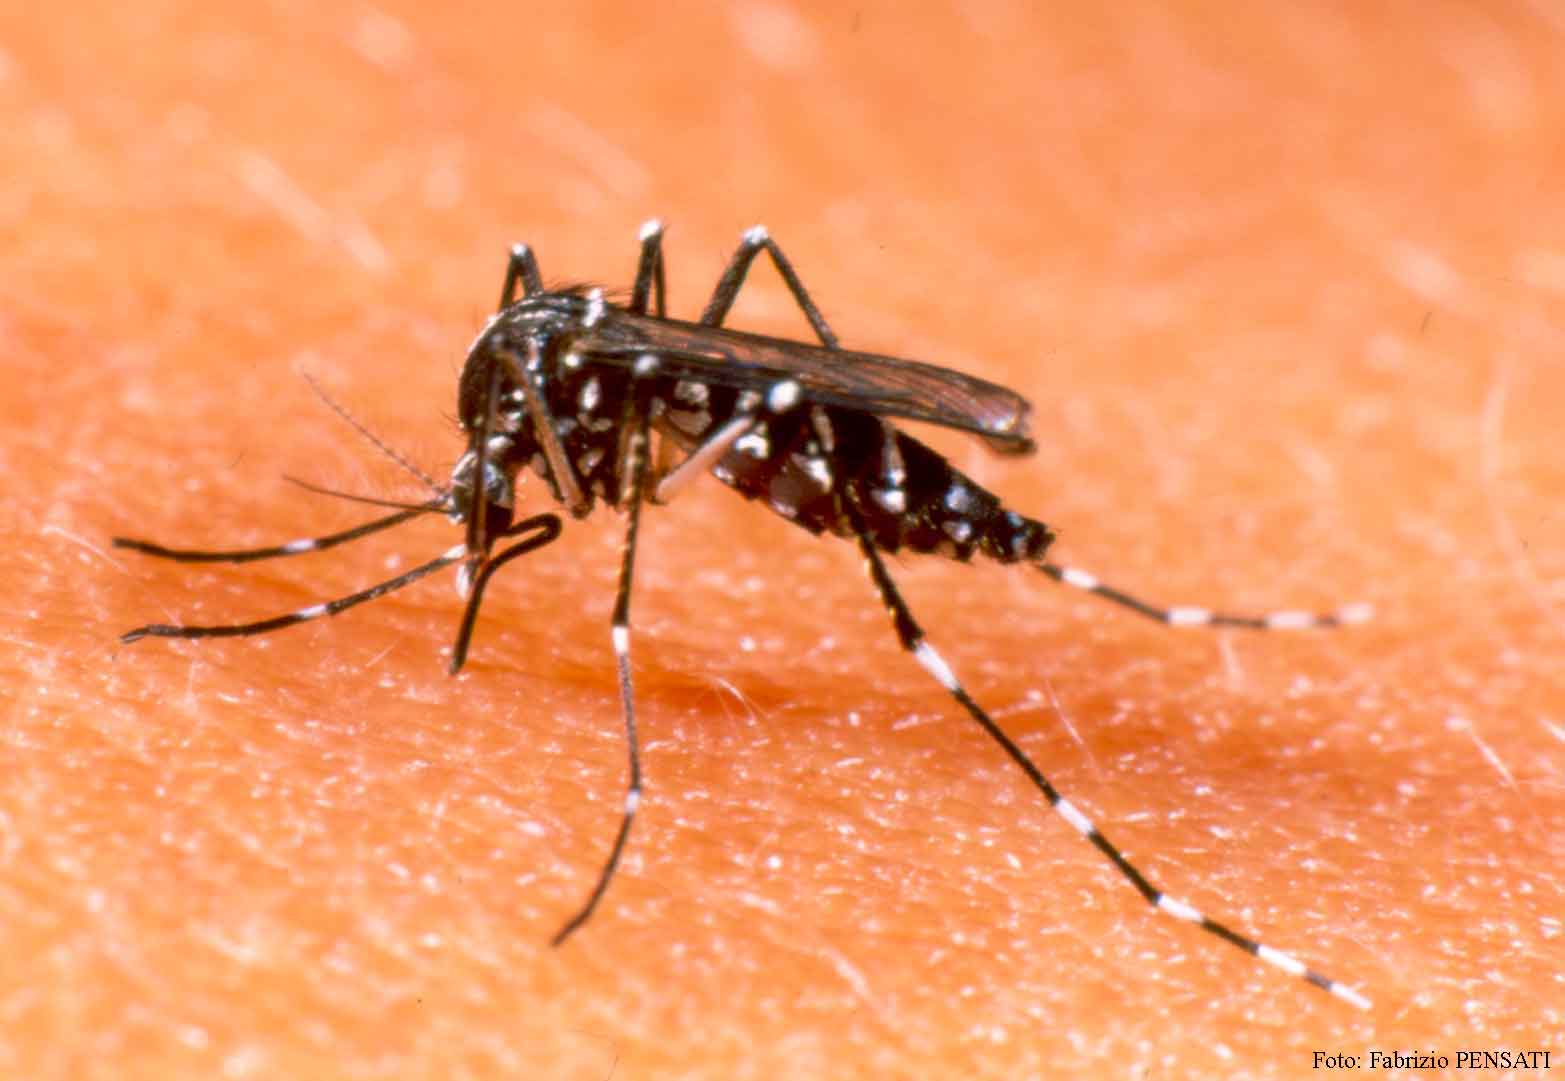 Cities account for 60% of state’s dengue casualties this year